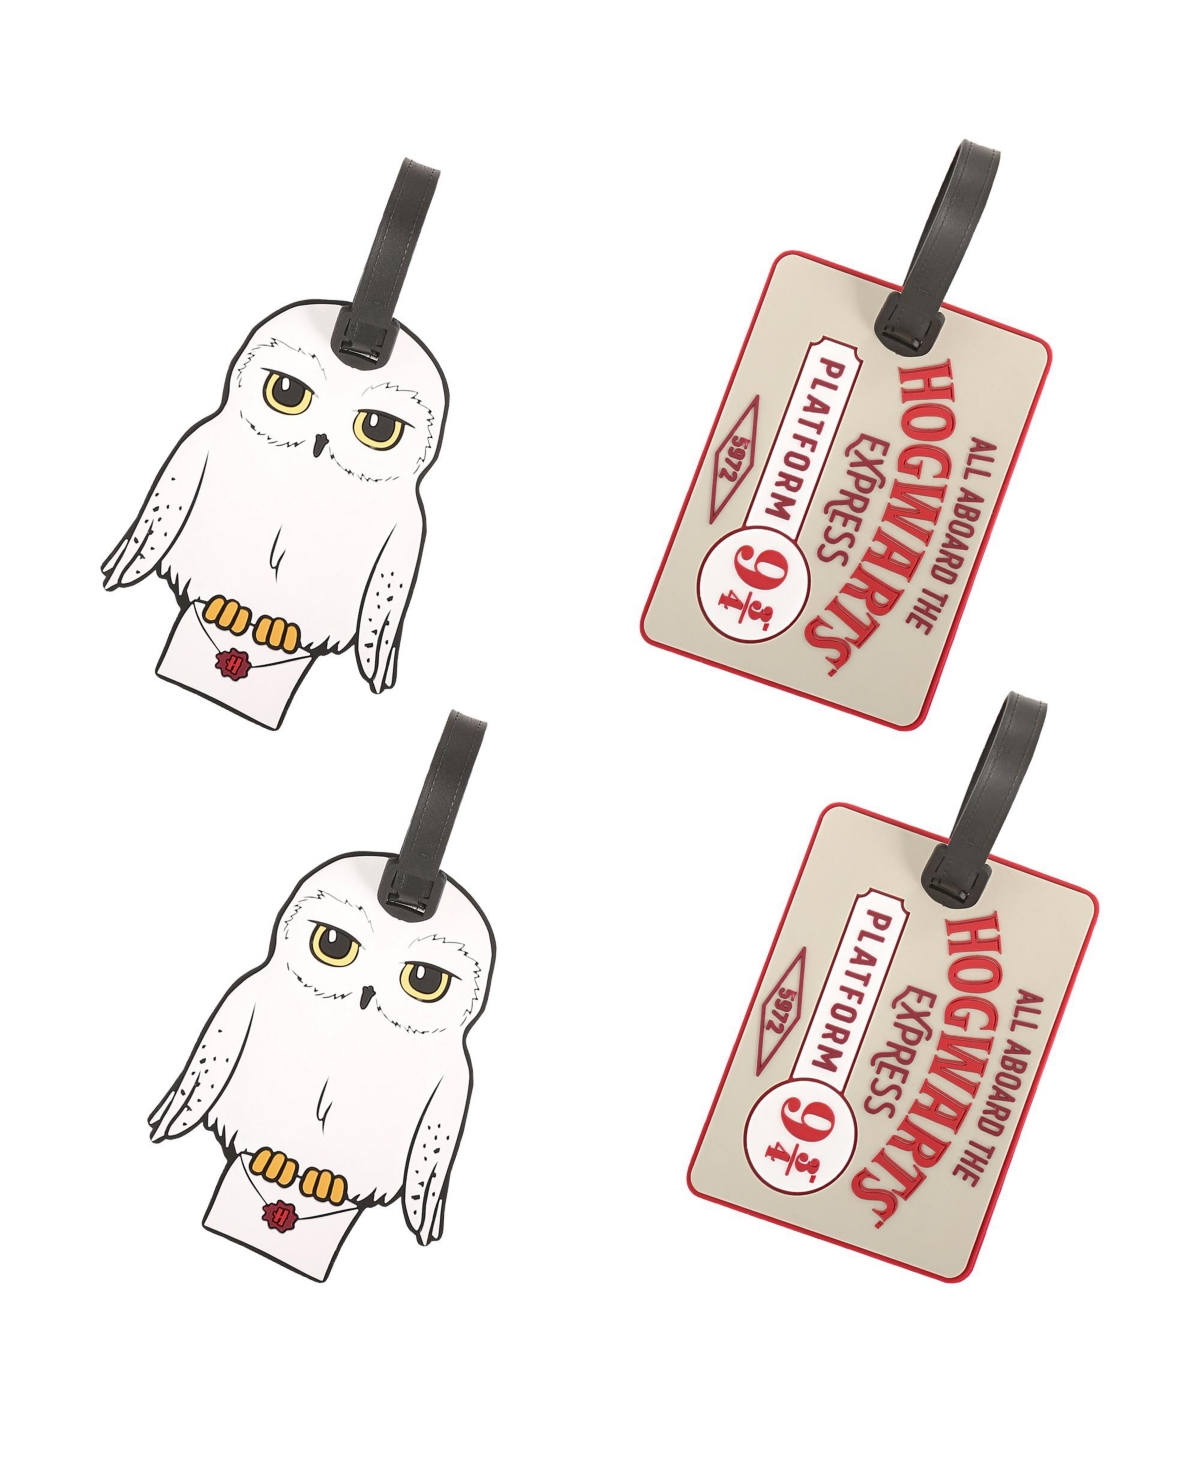 Luggage Tag Hedwig The Owl and Hogwarts Express Platform 9-3/4 Pvc Travel Tags Gifts - Set of 4 - White, red